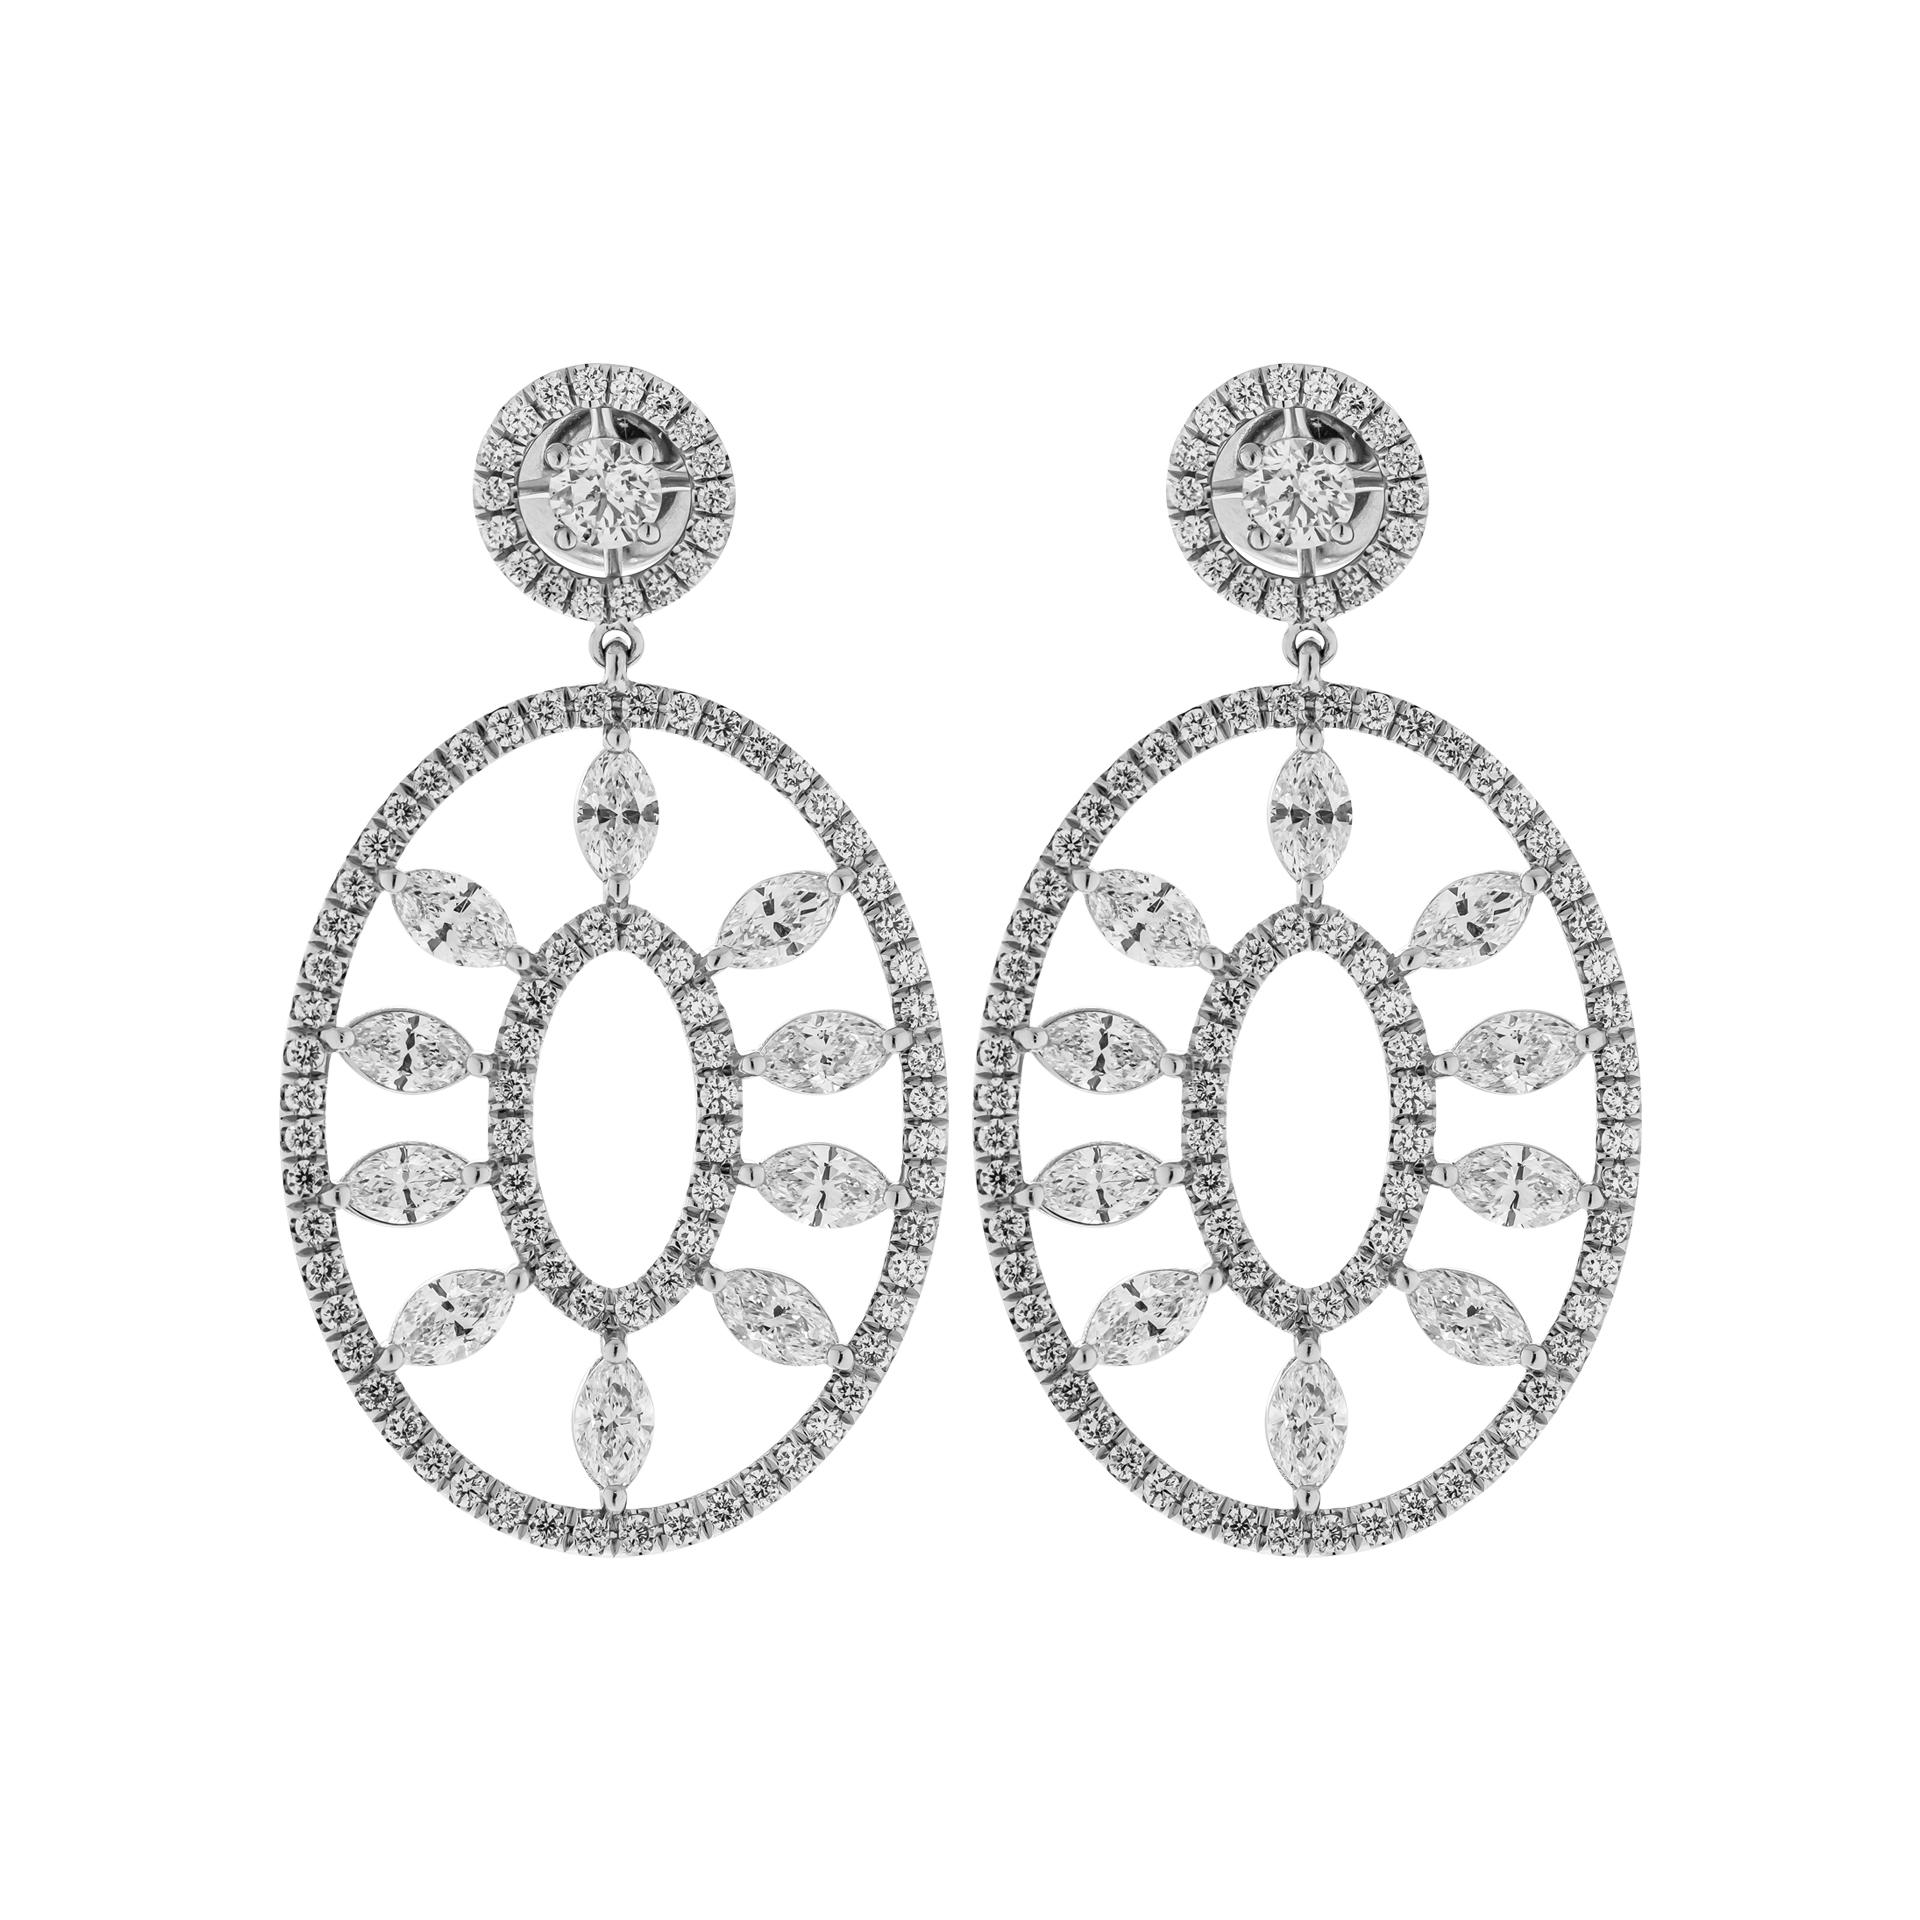 Earrings in Platinum with diamonds
1 round & 1 oval wire earrings with Marquises stones;
Total Carat Weight of Marquises : 3.08ct + 2 round diamonds at the top (0.46ct)
Total Carat Weight of  melee: 1.11ct
20 Marquise diamonds 4.7mm x 3.0mm
Total